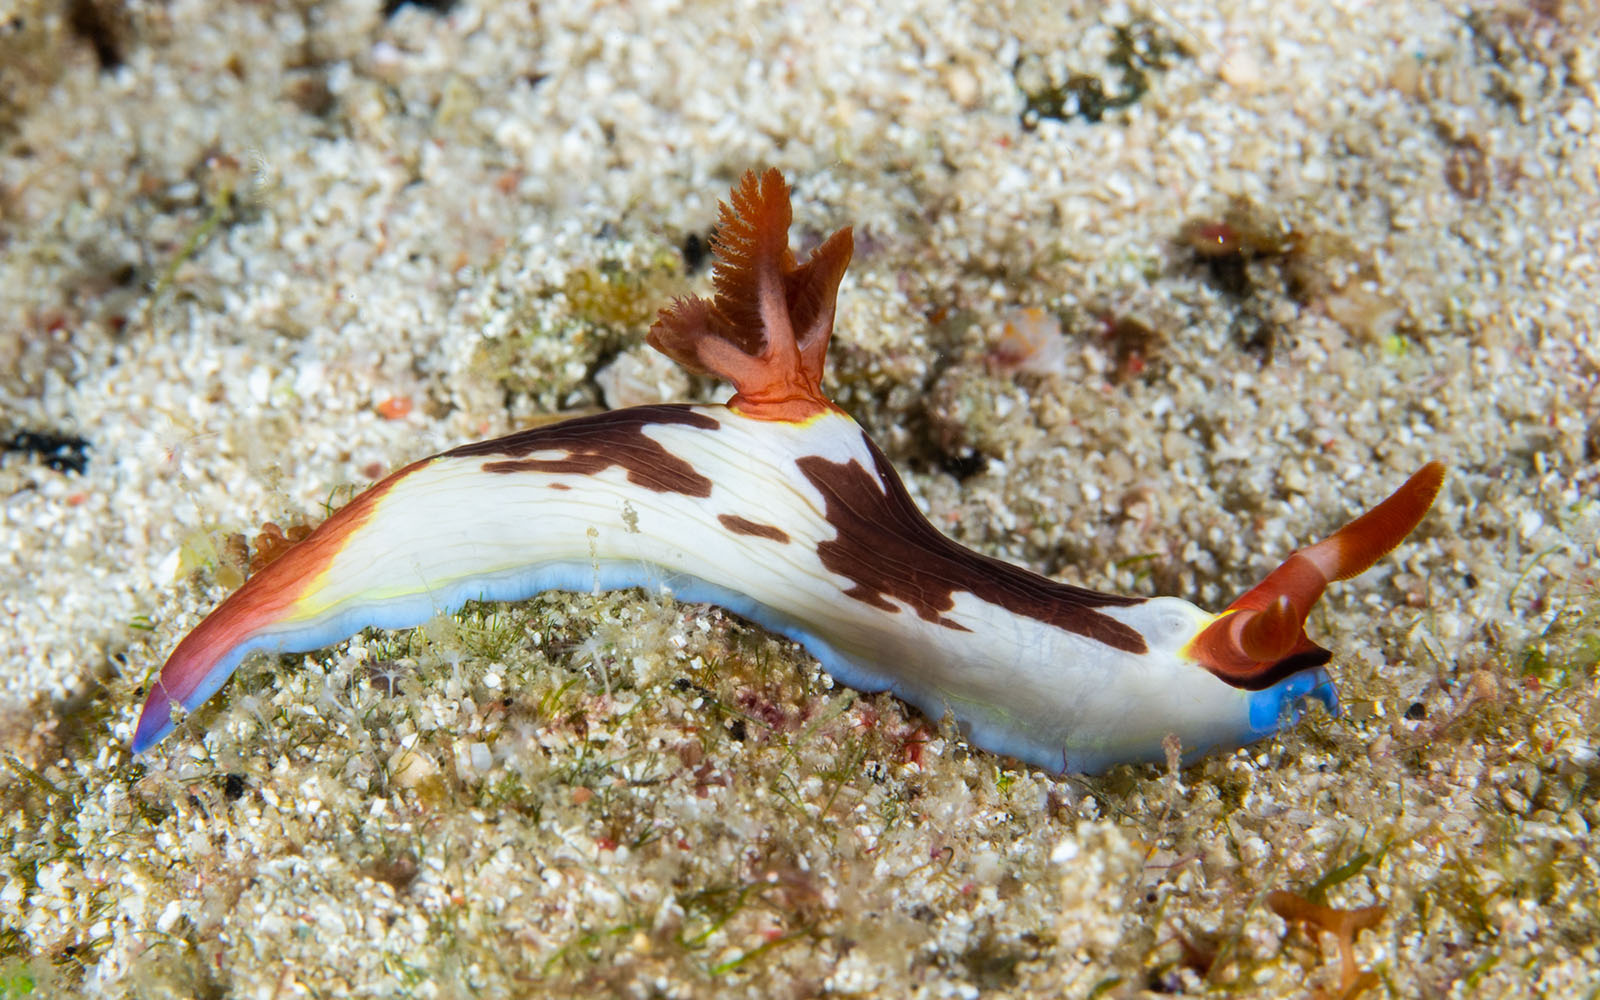 A nudibranch photographed by Snorkel Vacations on a snorkeling trip to Raja Ampat